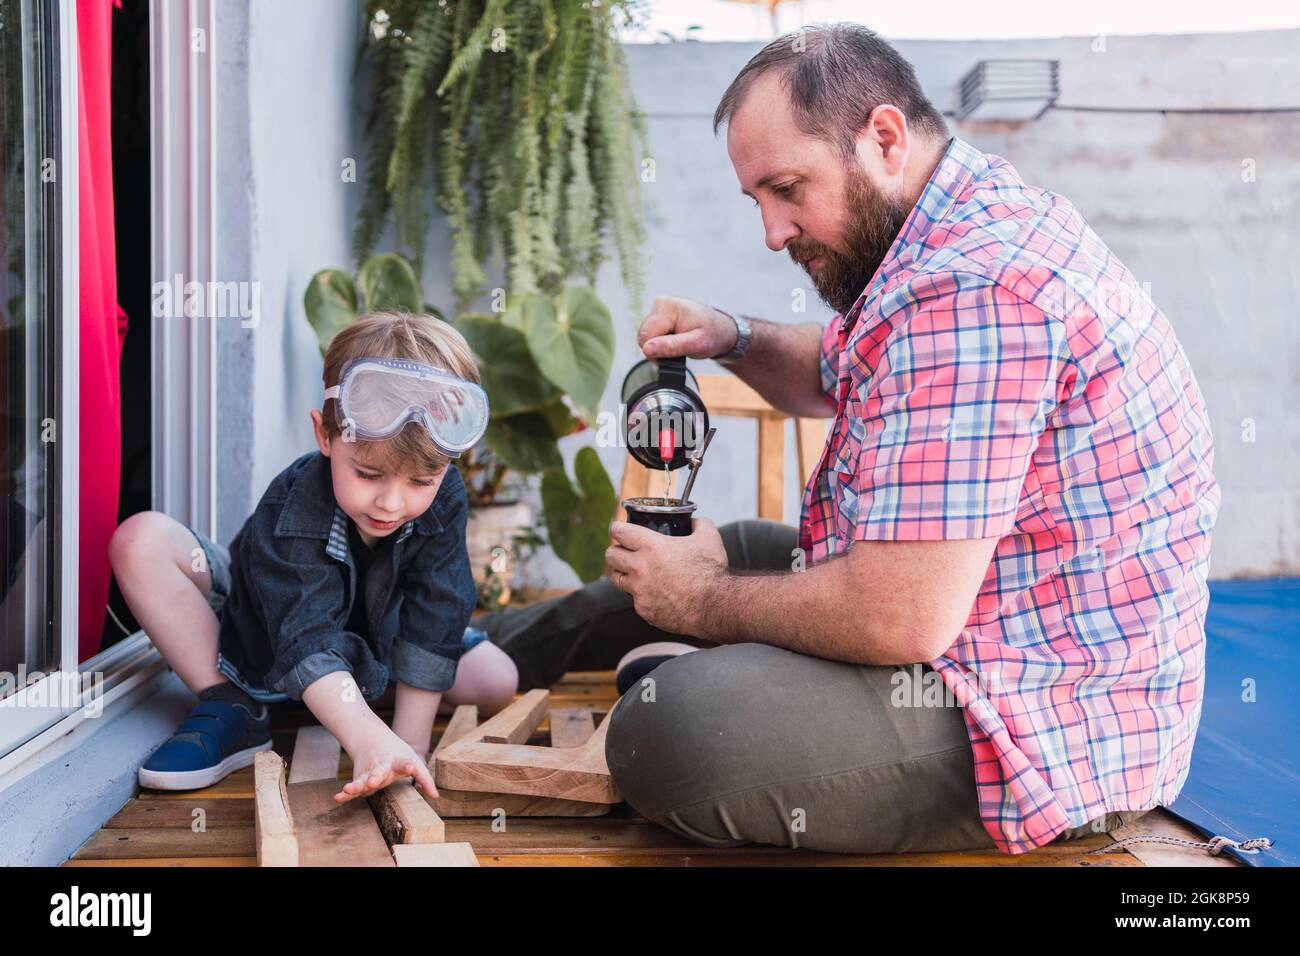 https://c8.alamy.com/comp/2GK8P59/hipster-dad-pouring-herbal-tea-from-thermos-into-calabash-gourd-against-boy-with-lumber-on-boardwalk-2GK8P59.jpg